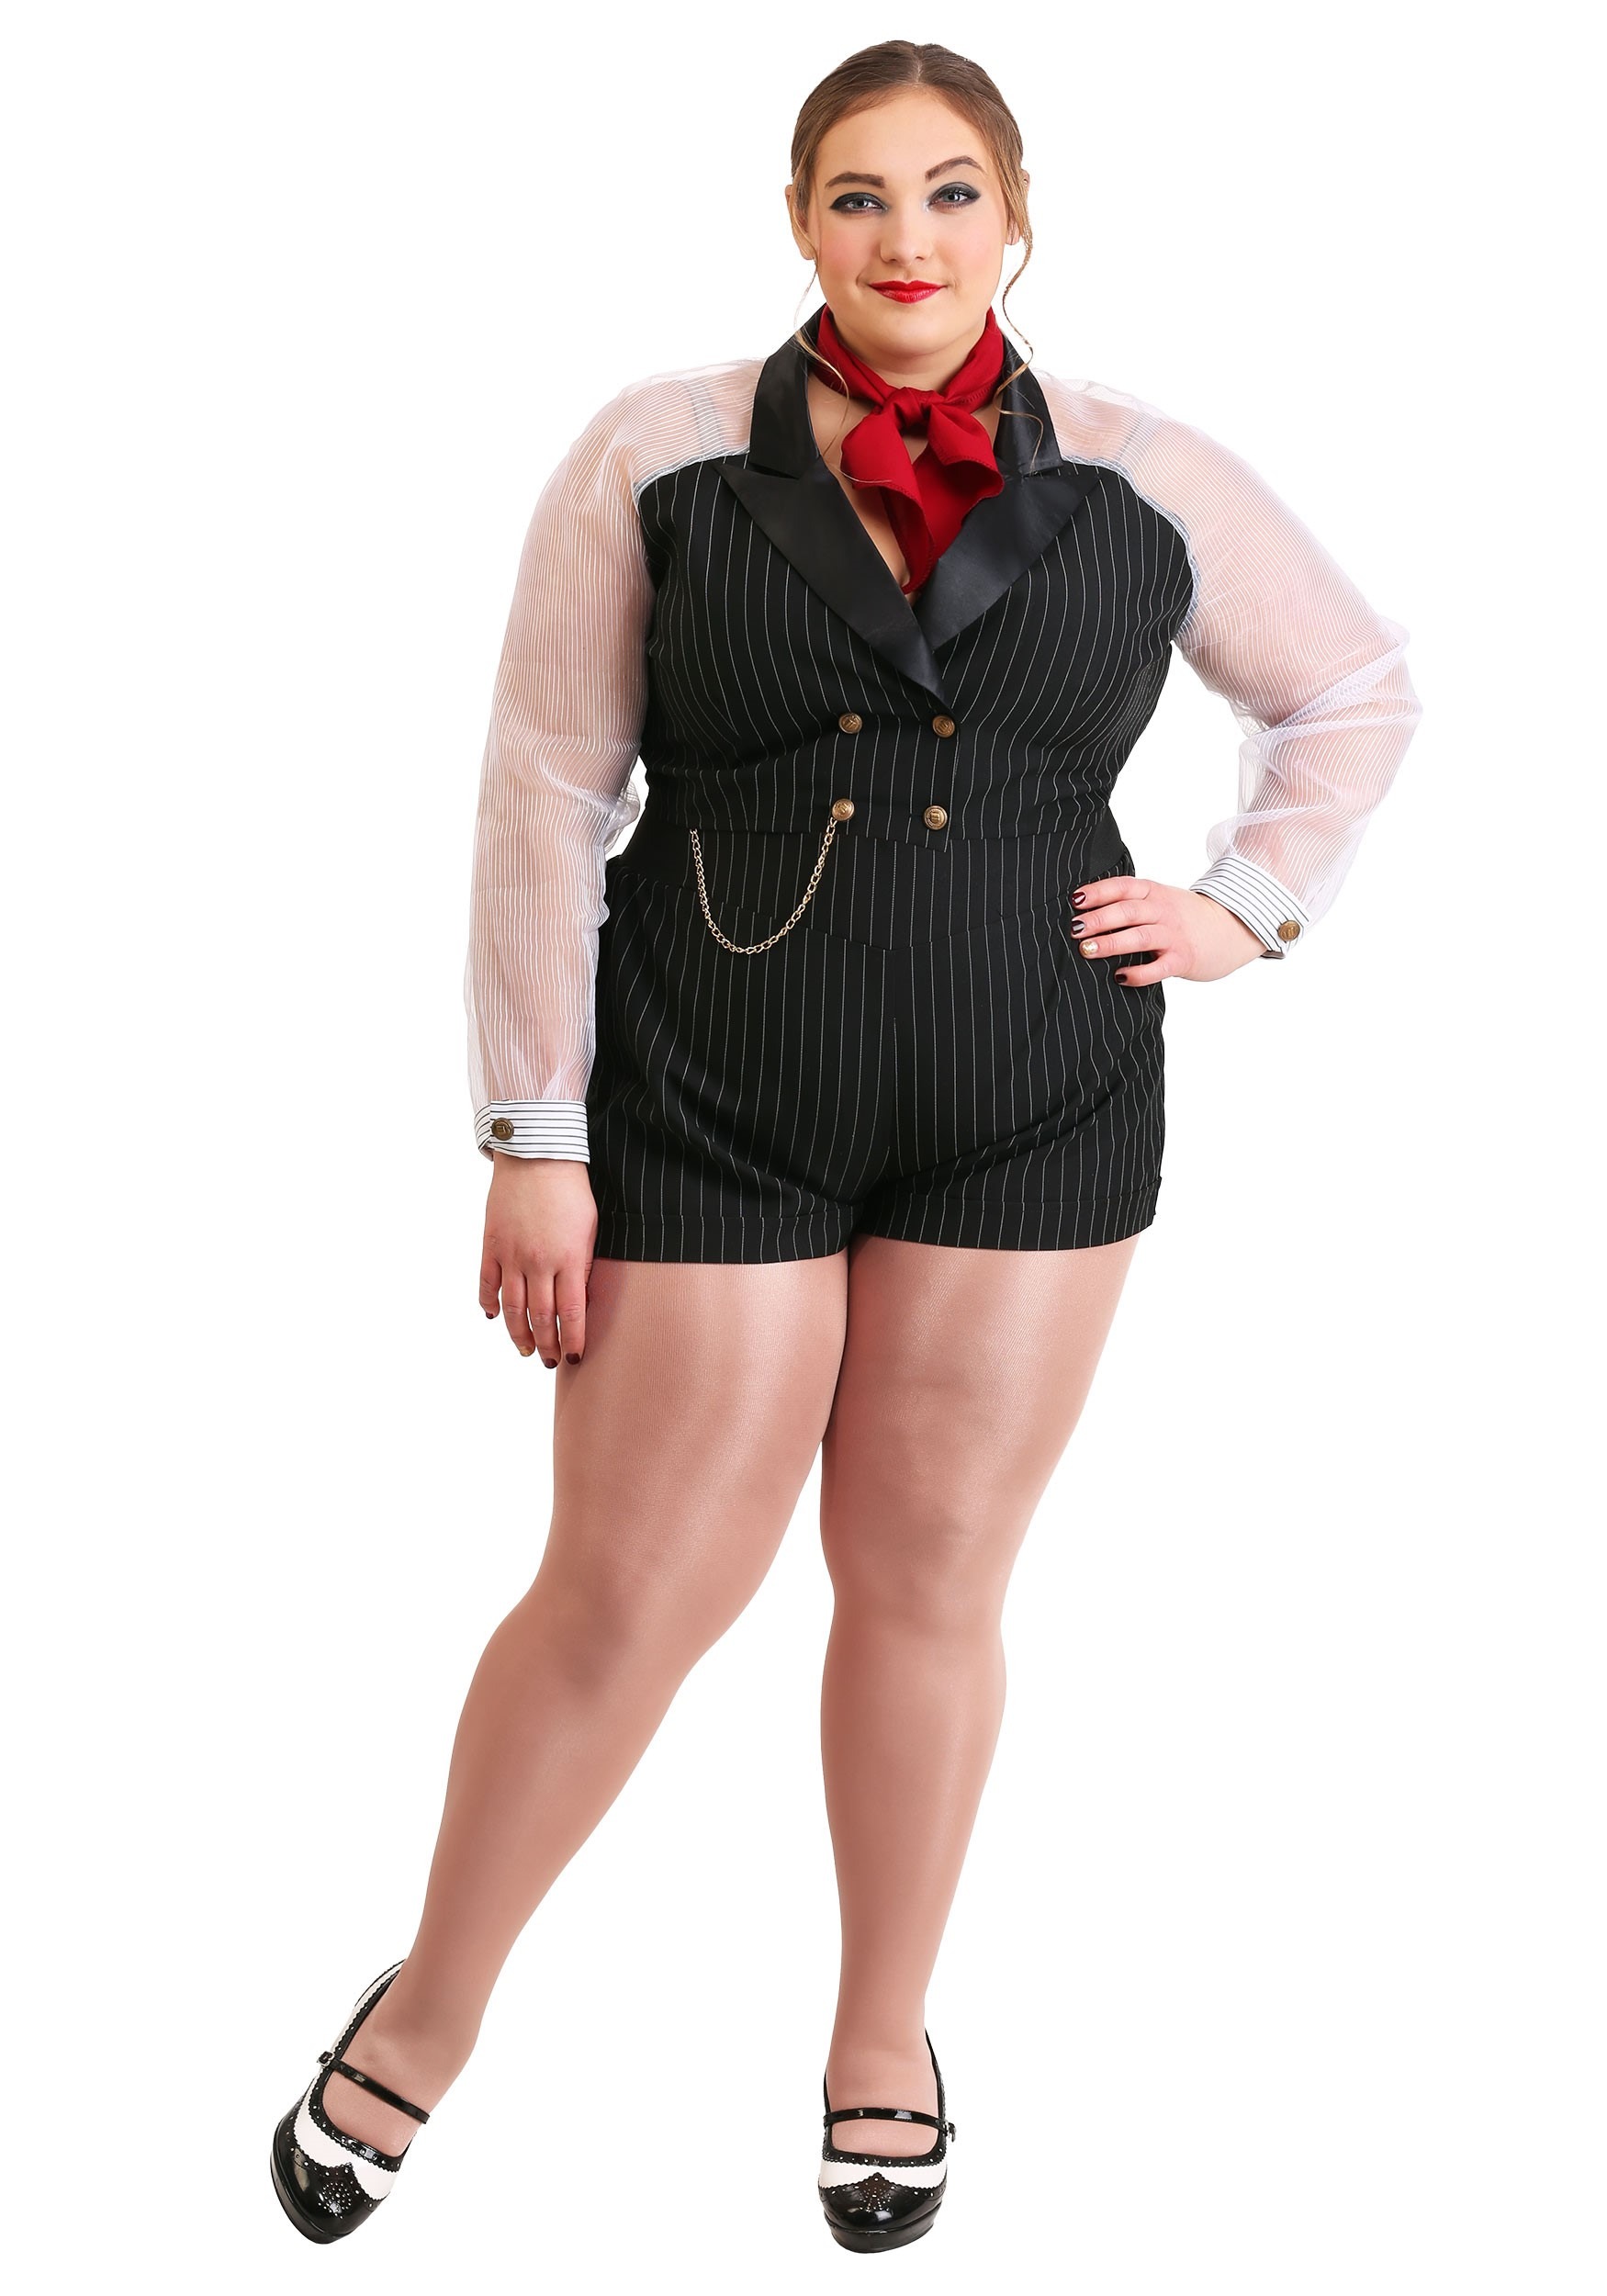 Plus Size Womens Gangster Gal Costume